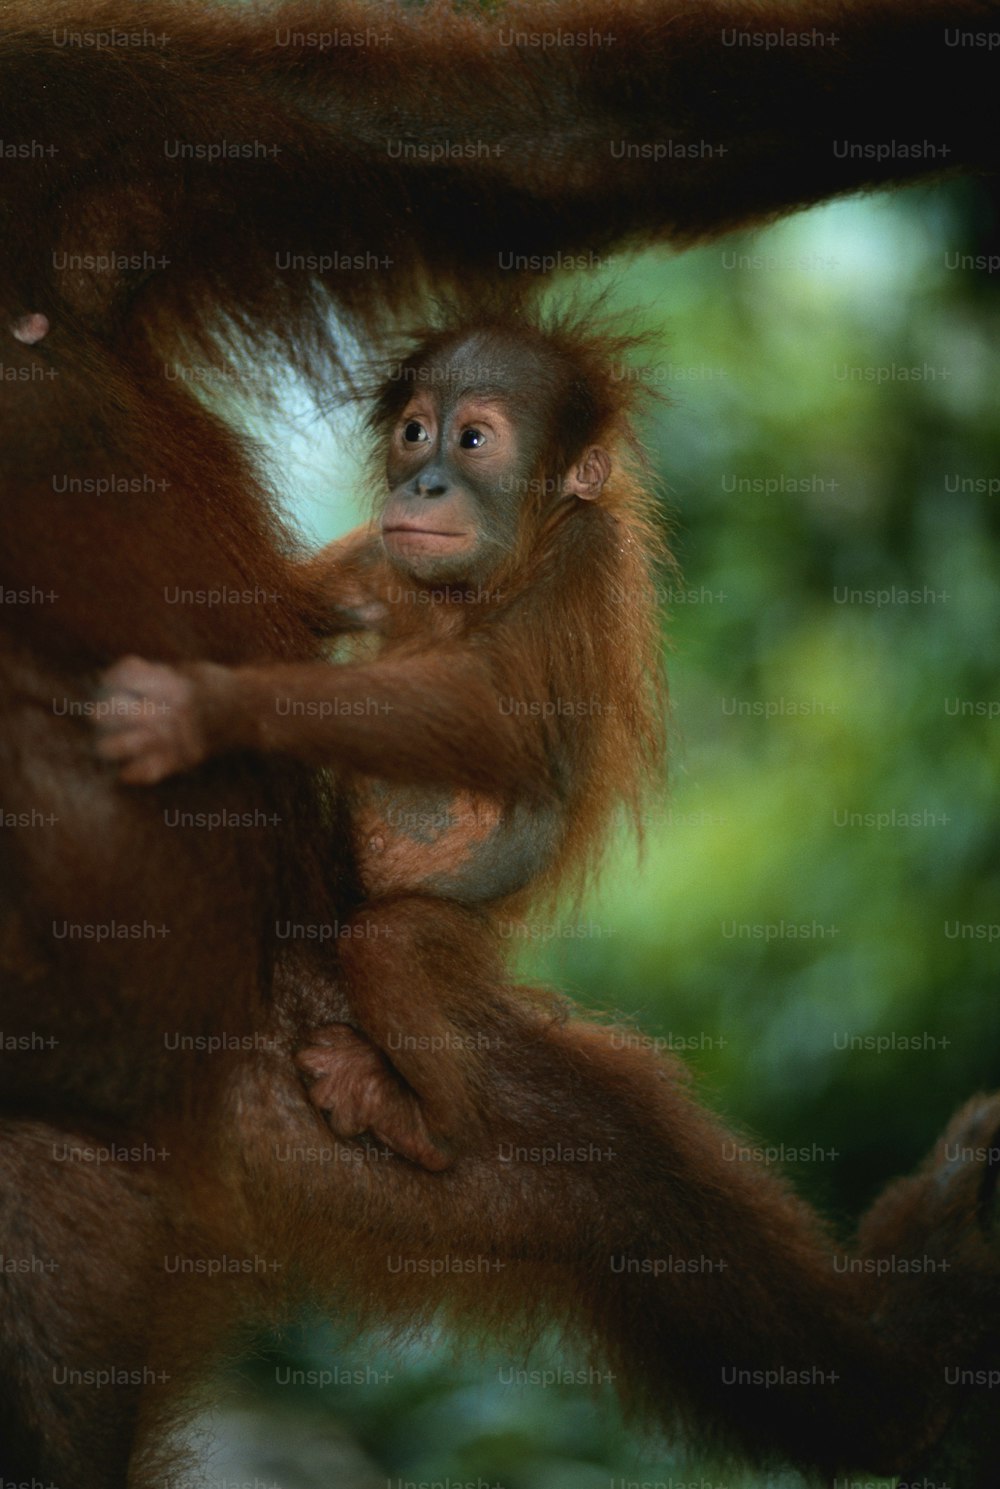 a baby oranguel hanging from a tree branch